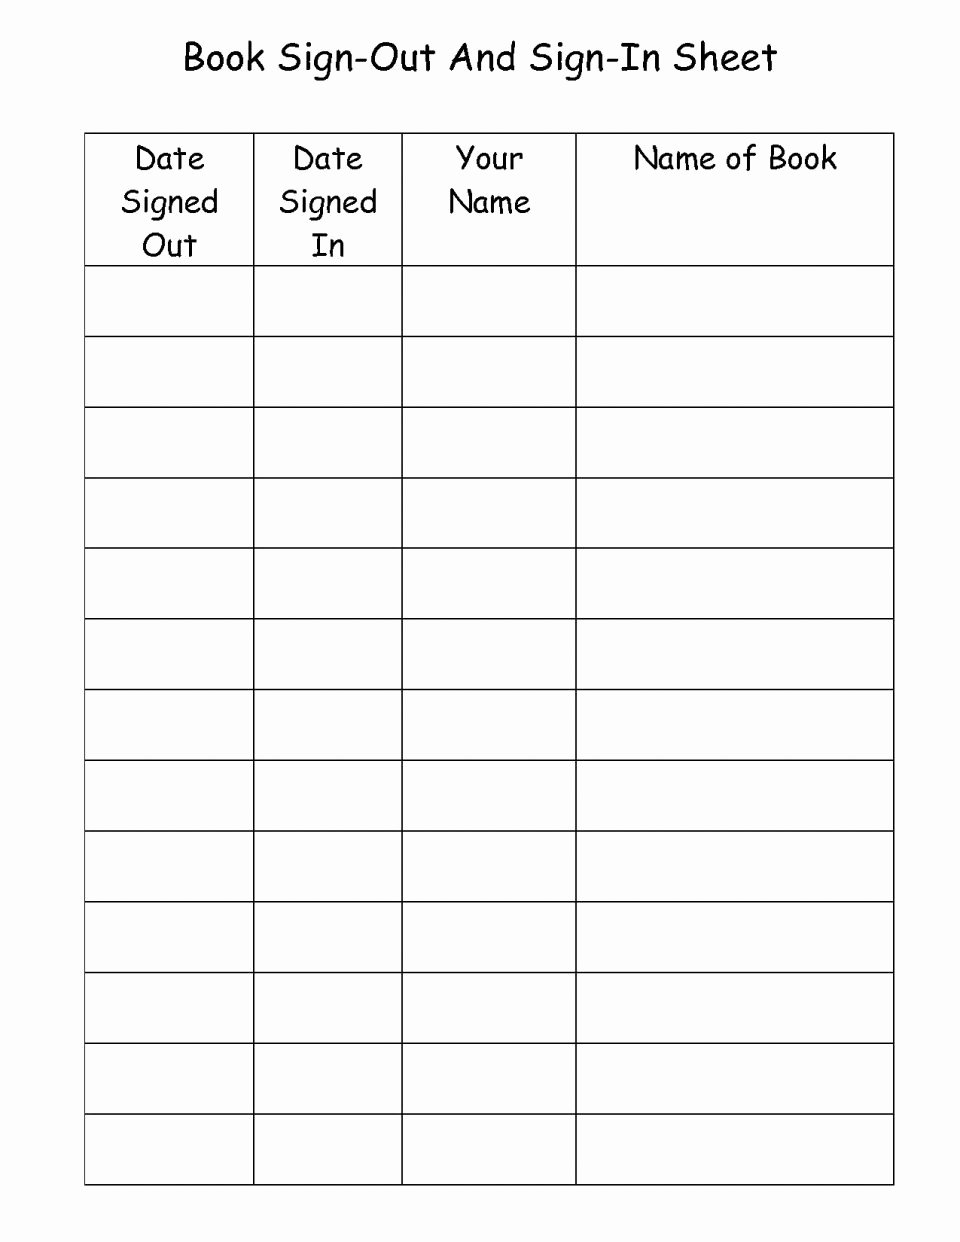 Check Out Sheet Template Unique Sheet Inventory Sign Out Template Free Download In Sample